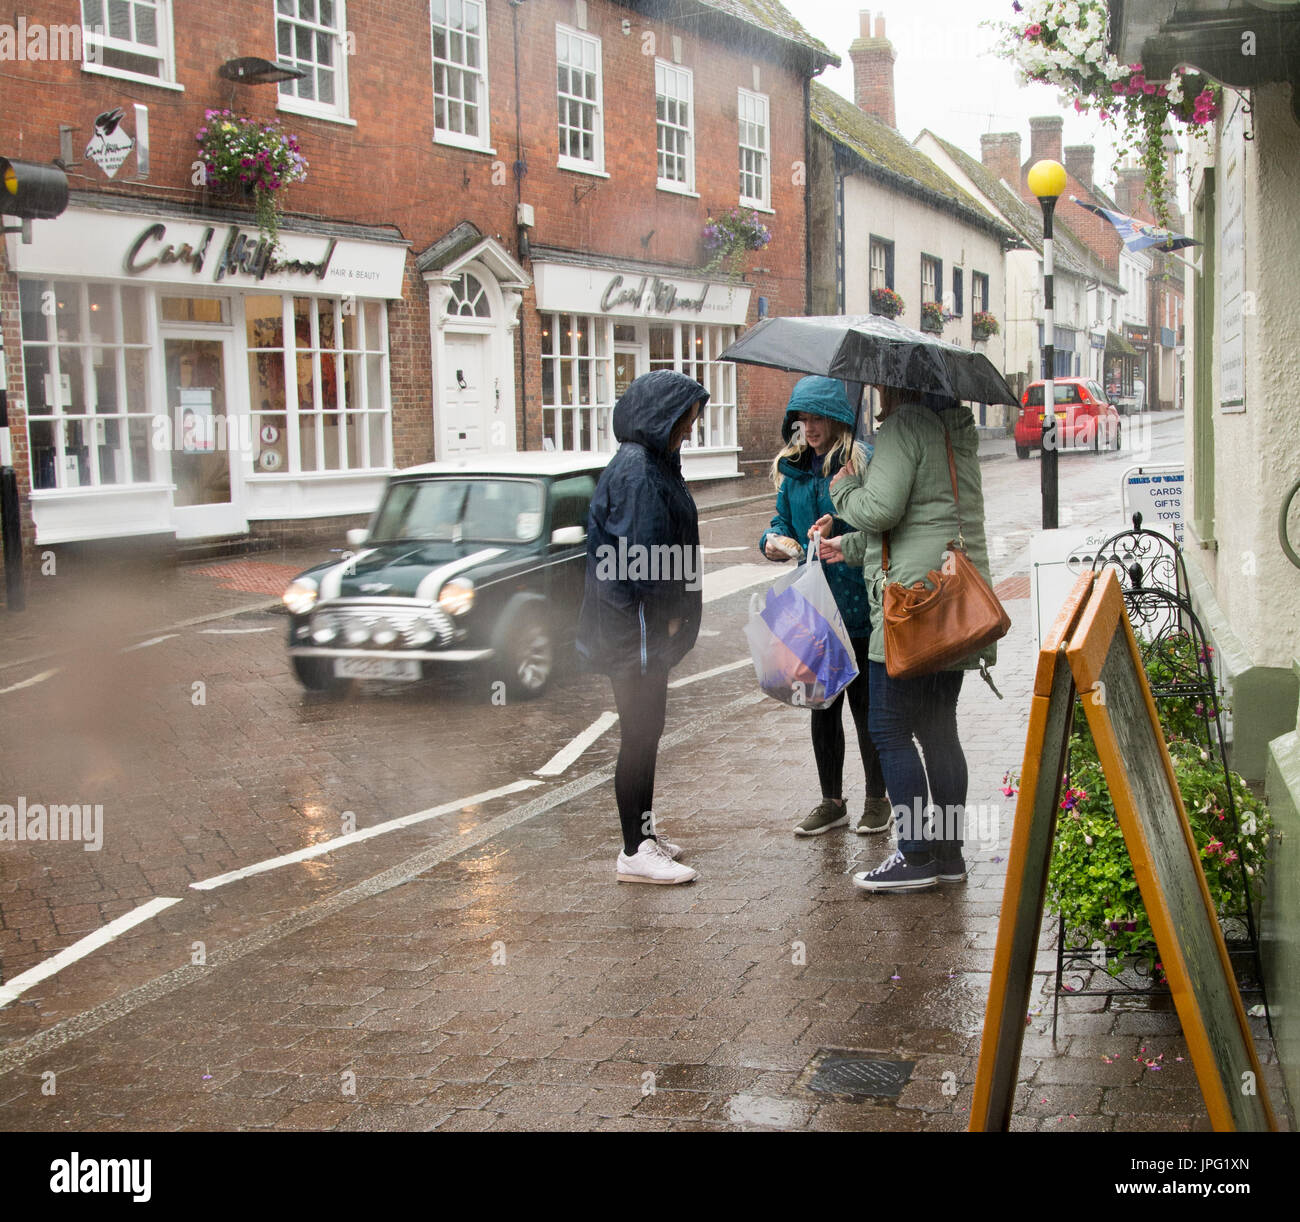 People shopping, talking in English village with umbrellas in rain in summer, August, UK Stock Photo